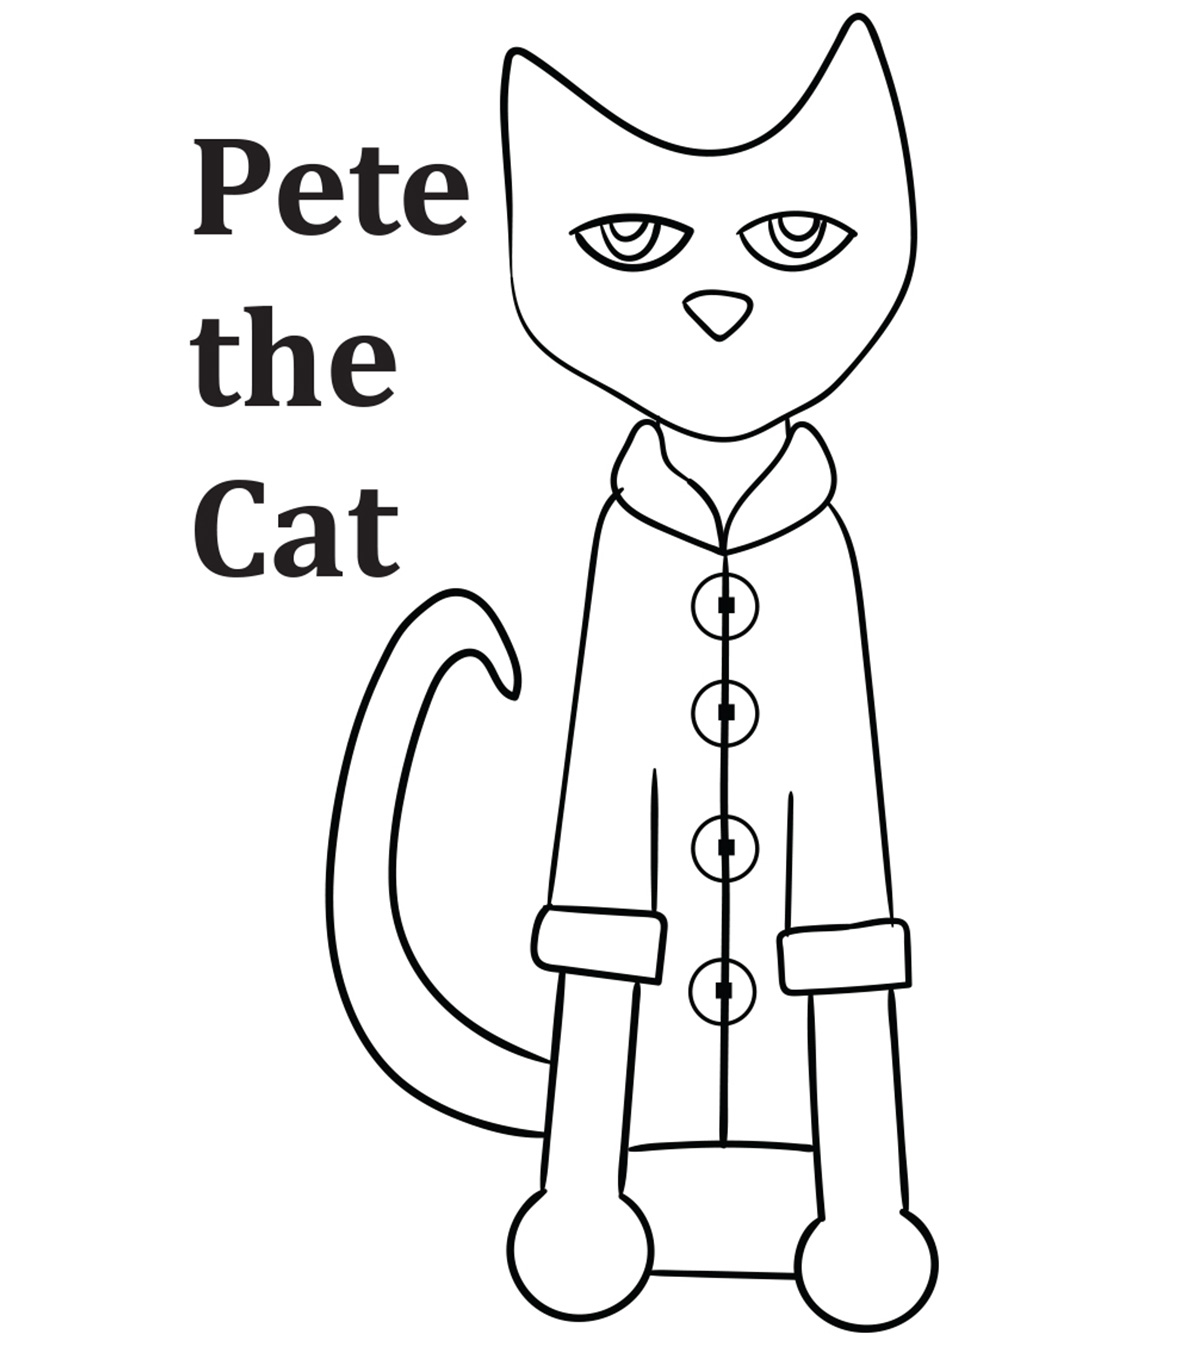 Pete The Cat Template Printable Printable Templates